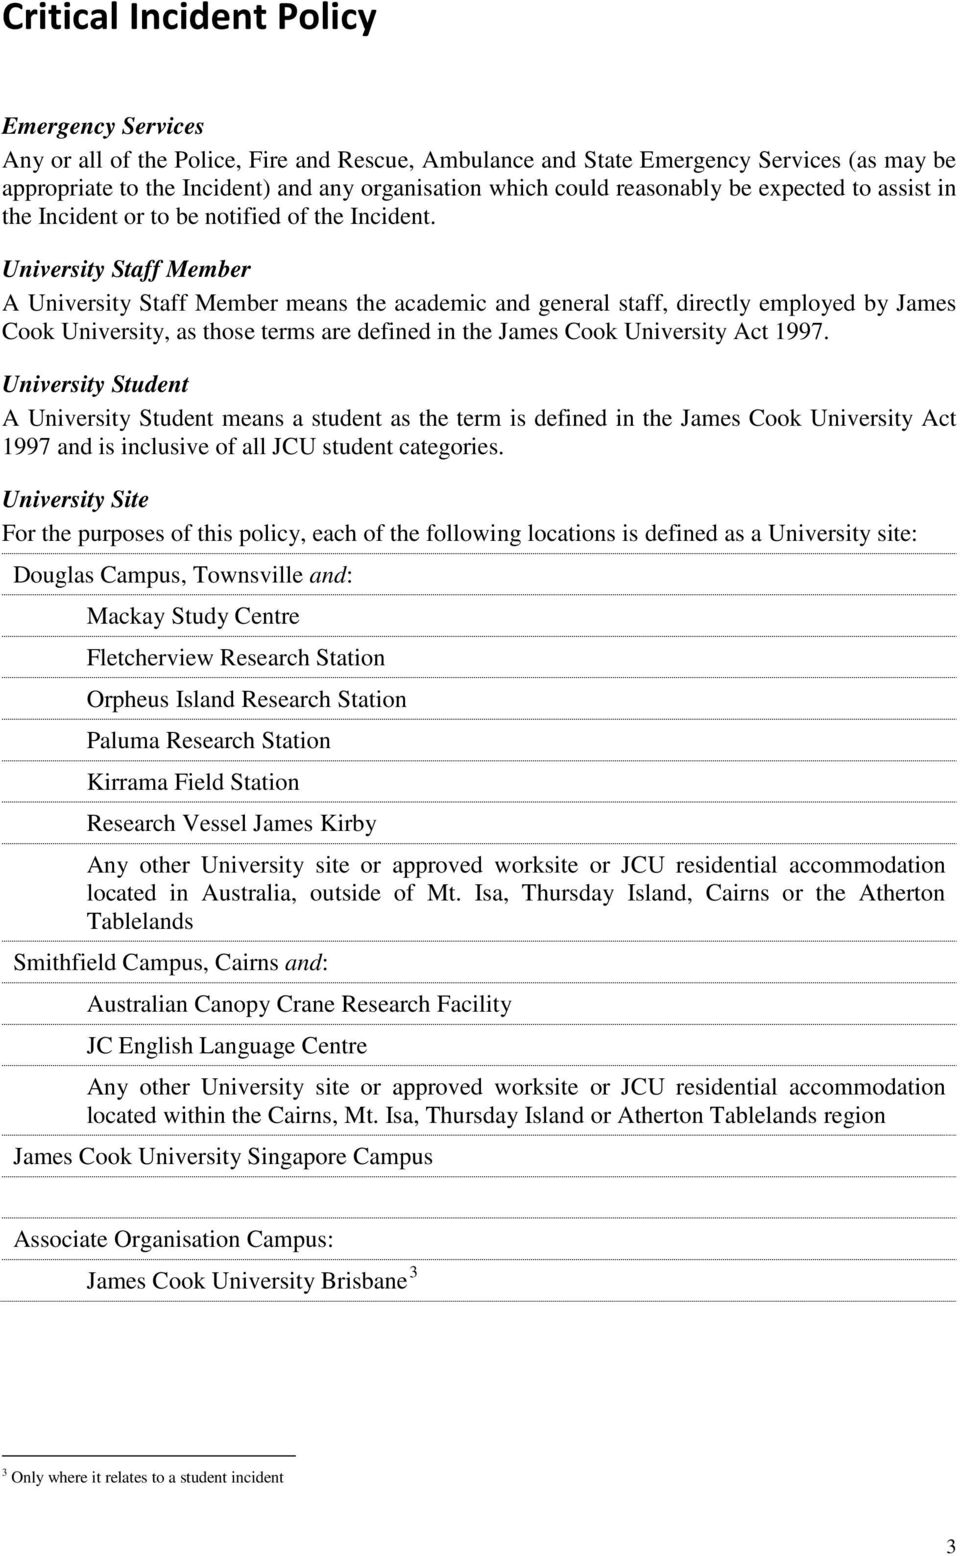 University Staff Member A University Staff Member means the academic and general staff, directly employed by James Cook University, as those terms are defined in the James Cook University Act 1997.